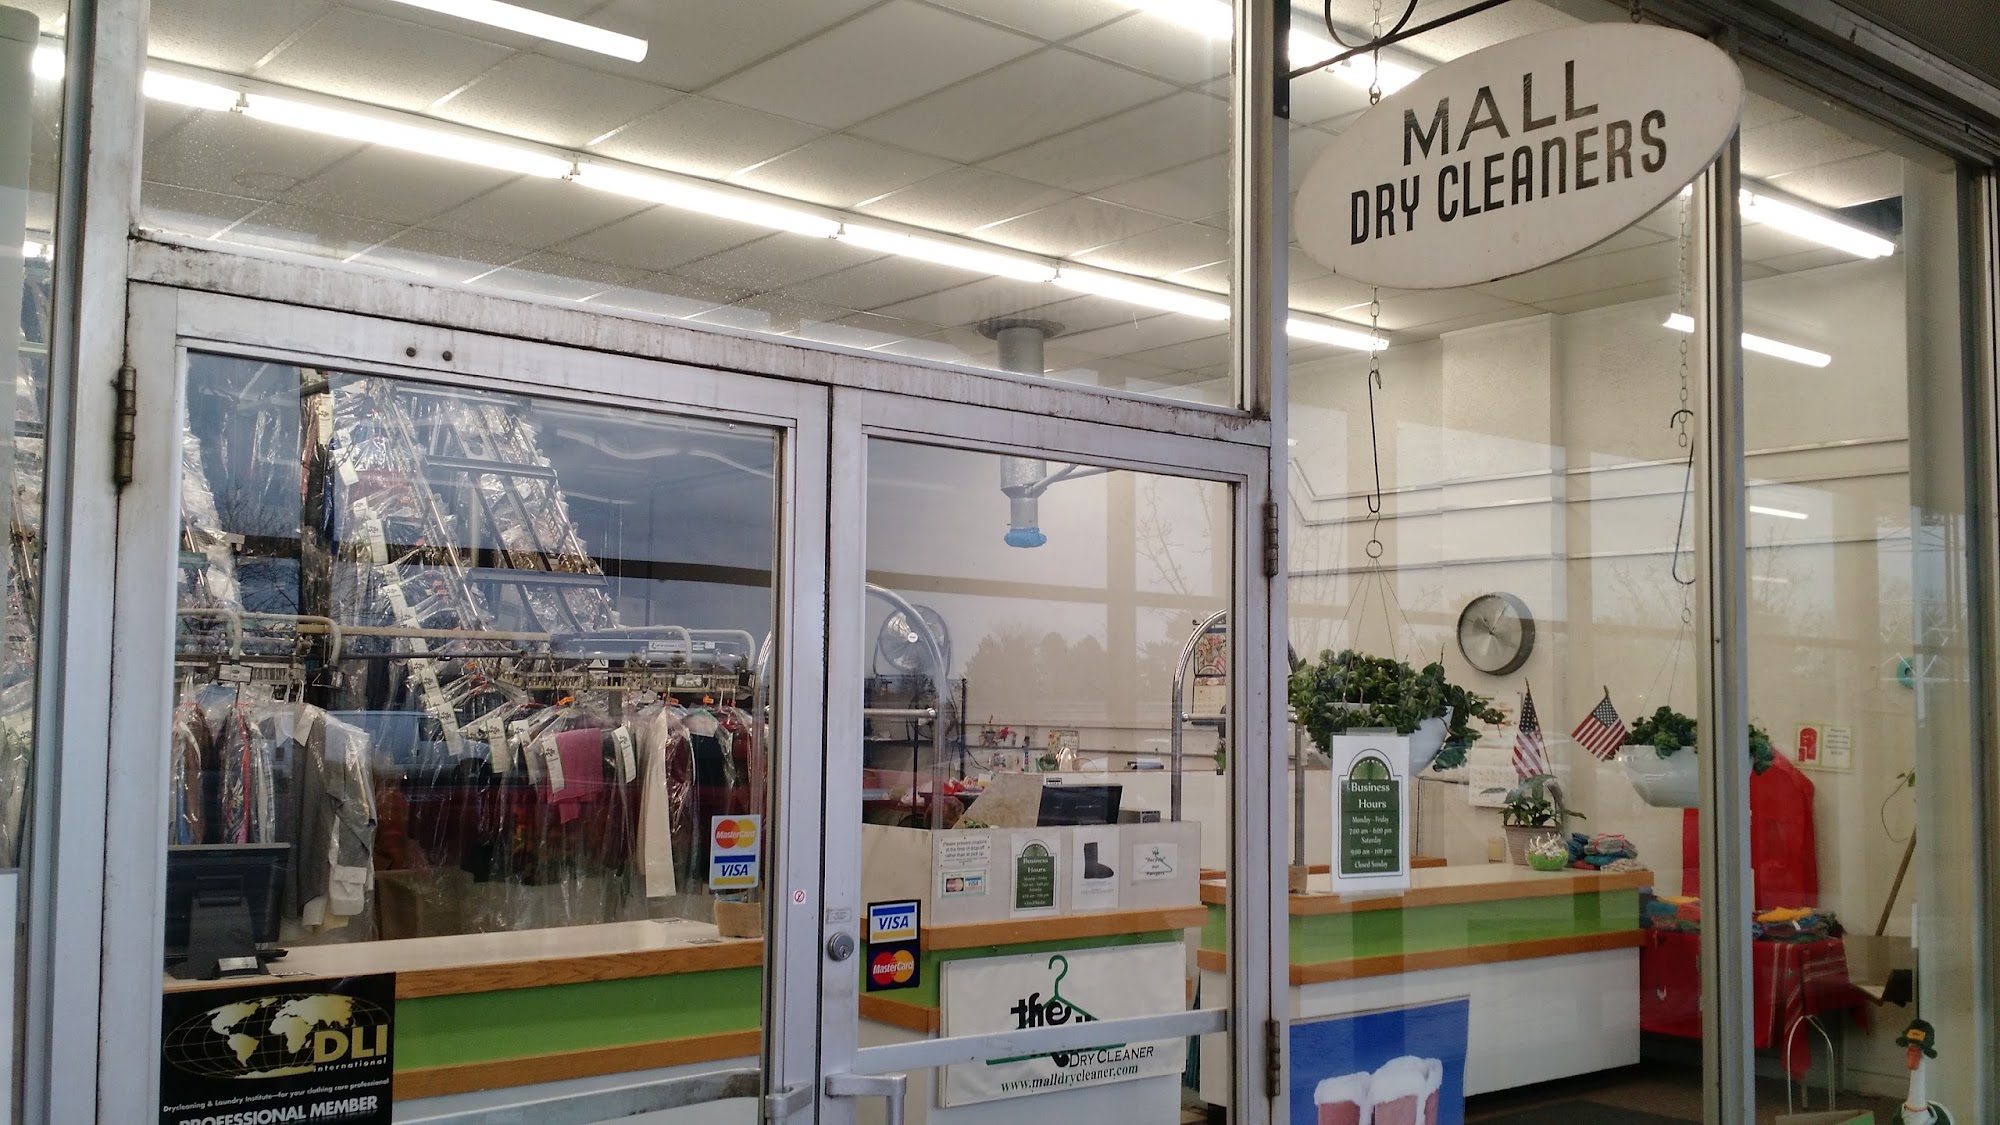 Mall Dry Cleaners